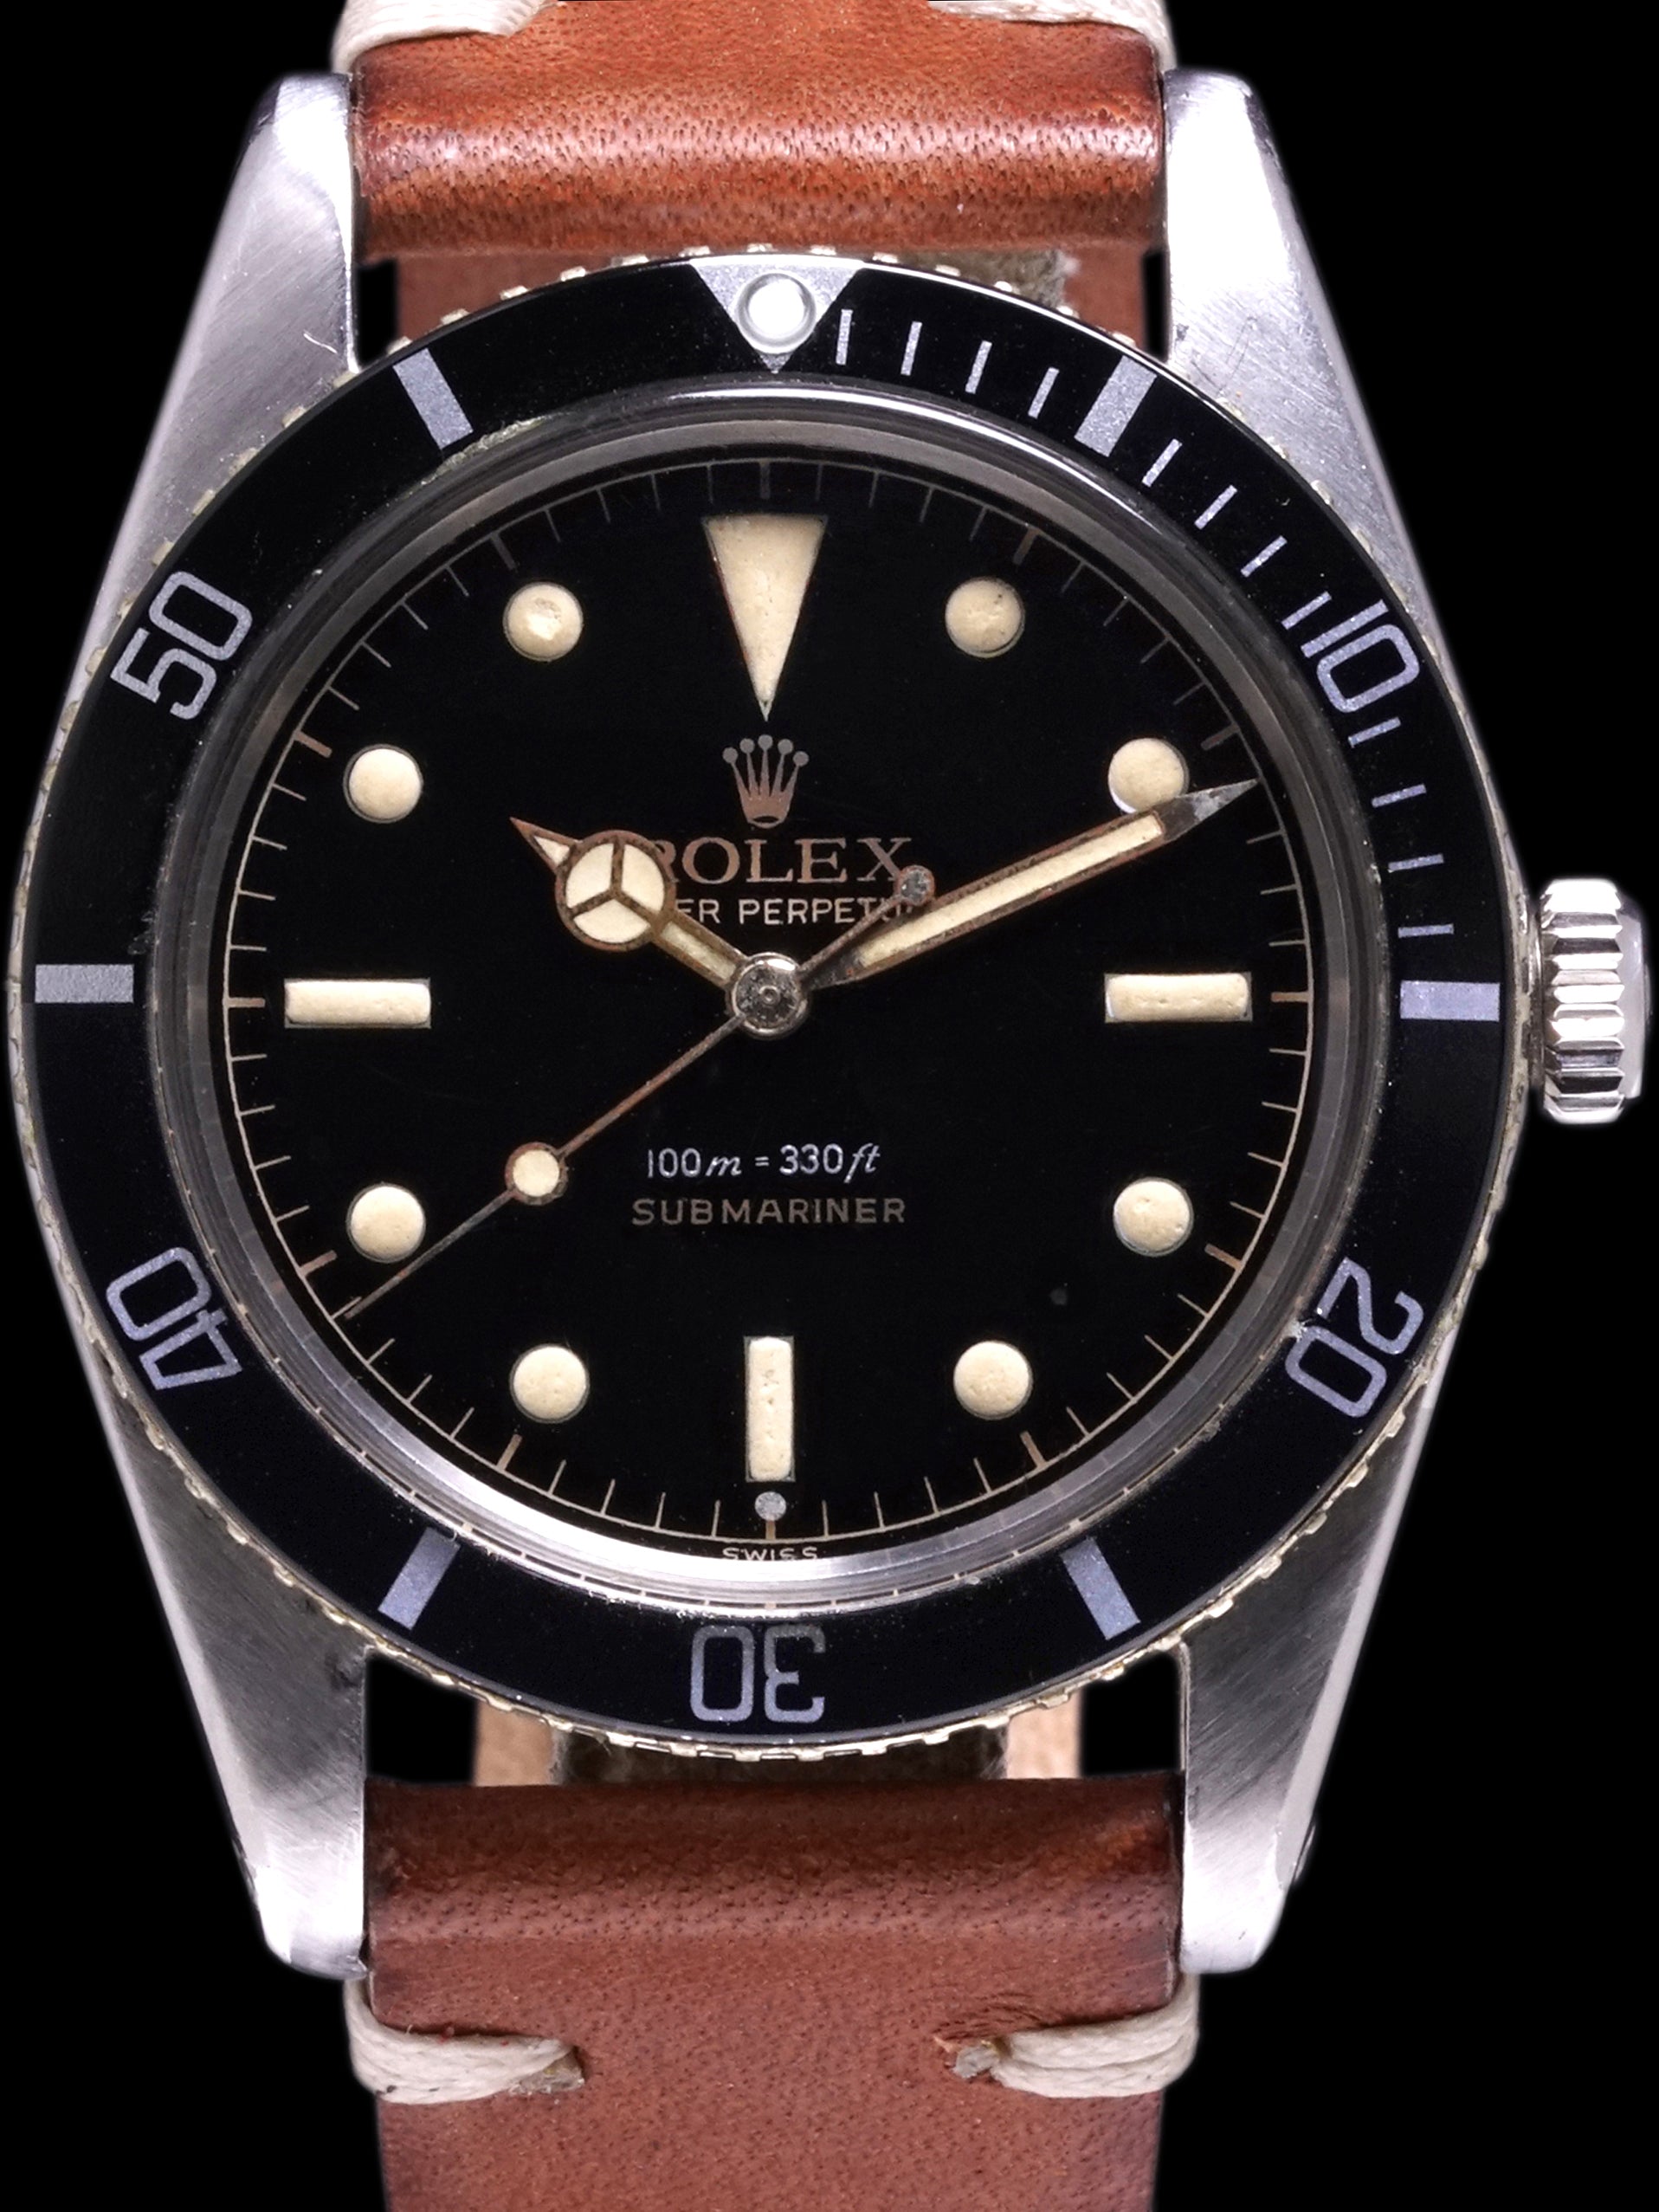 1962 Rolex Submariner (Ref. 5508) "Small Crown" Exclamation Point